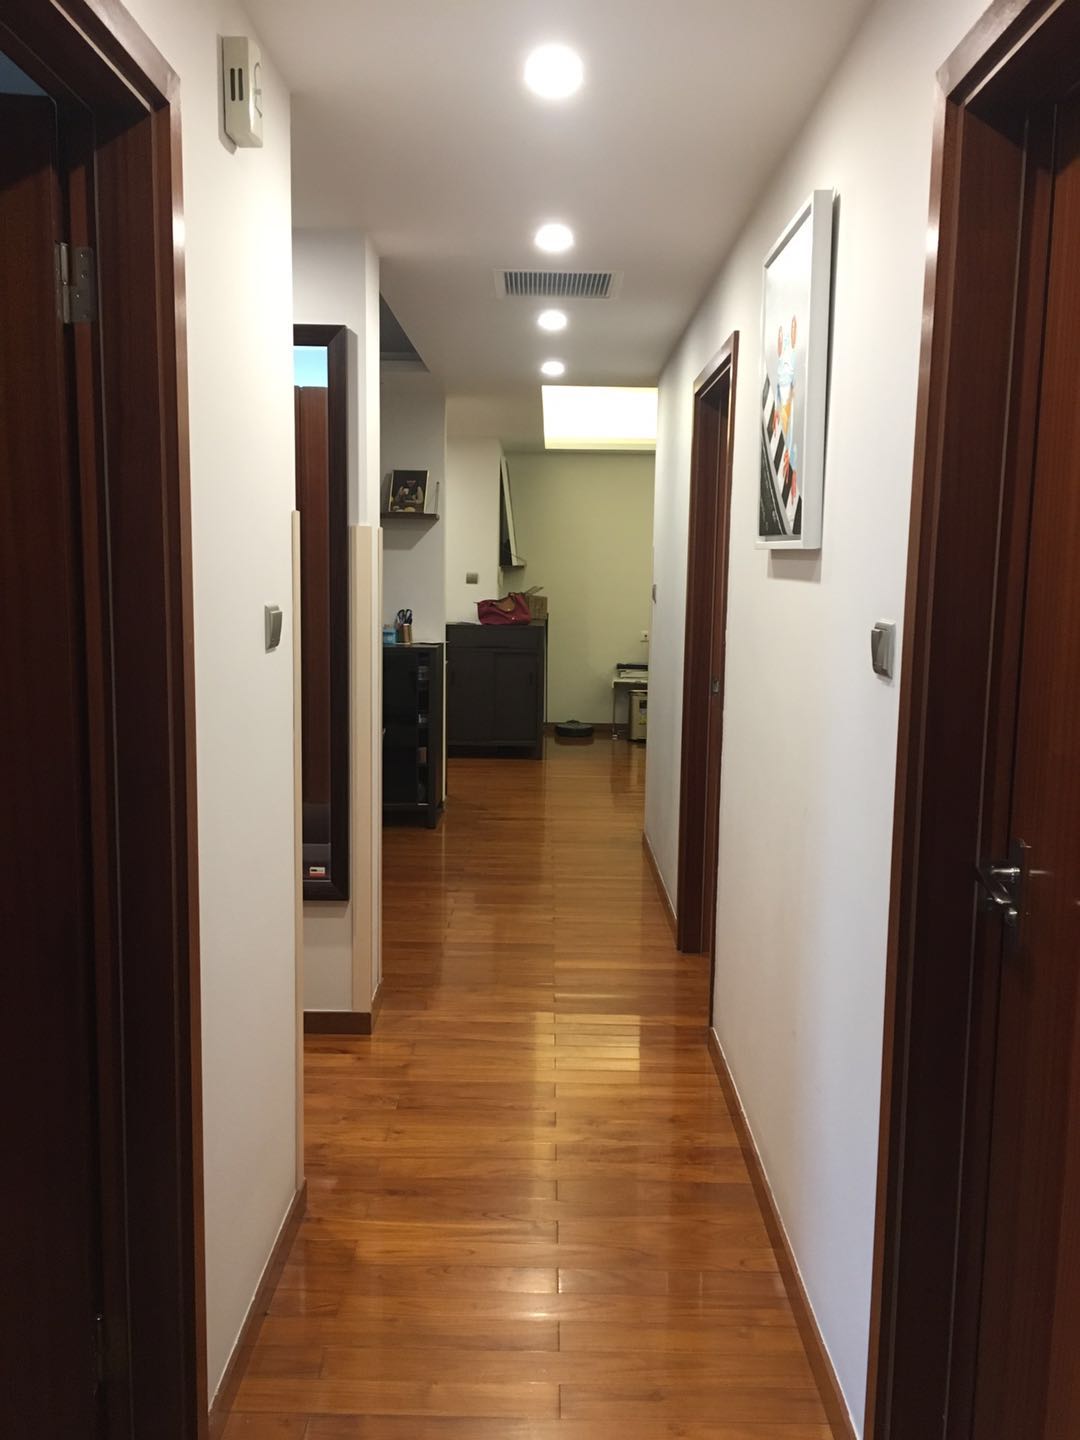 APARTMENT FOR RENT IN SHANGHAI Yanlord-Puxi Renovated Spacious Apartment for Rent in Shanghai